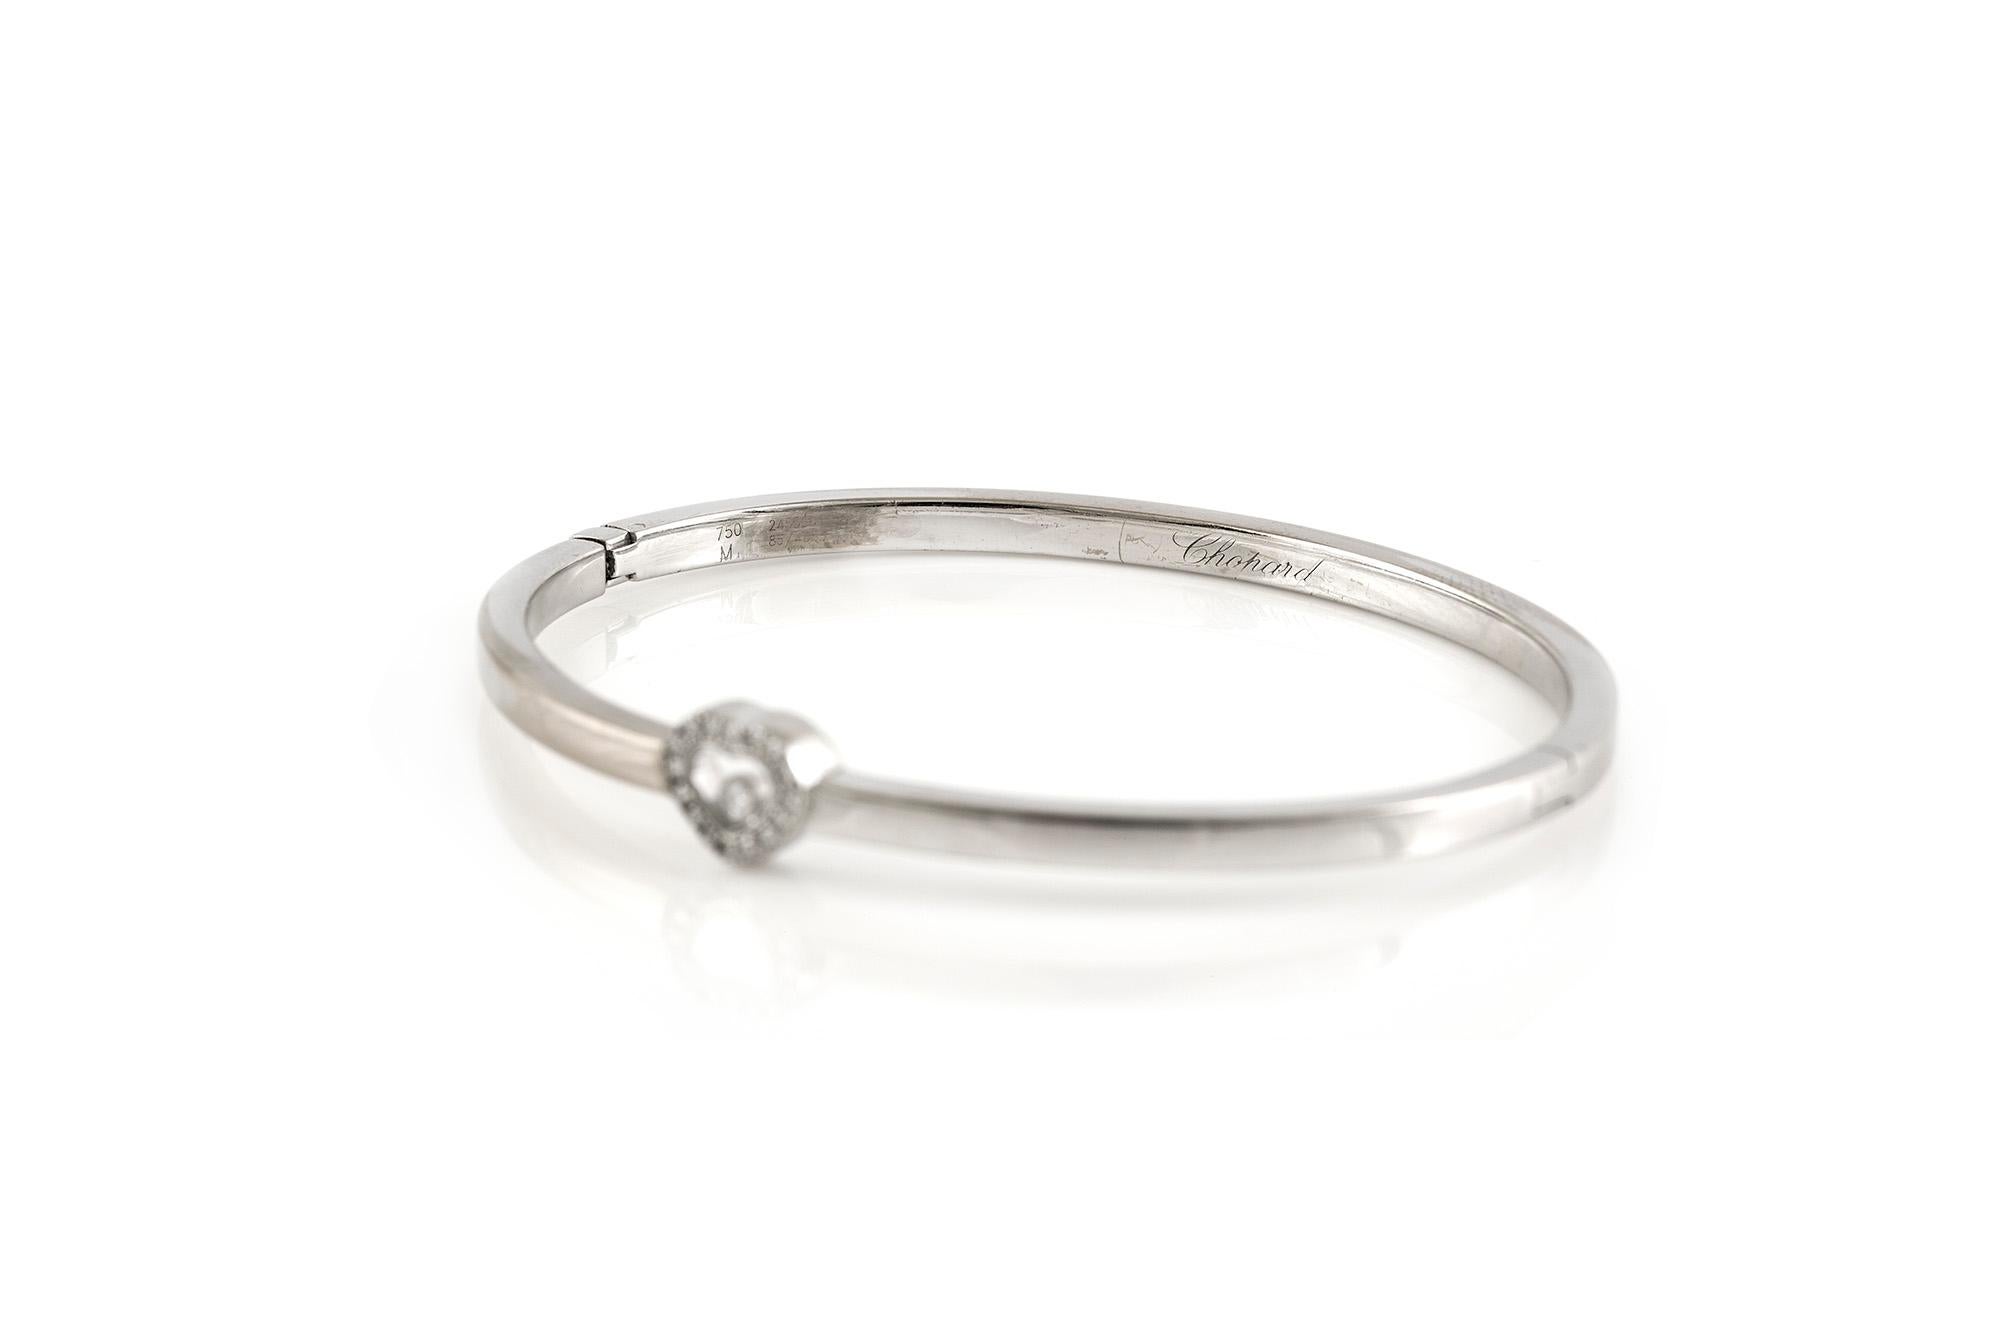 Chopard Happy Heart Bangle, finely crafted in 18 k white gold with diamonds weighing 0.37 carat.